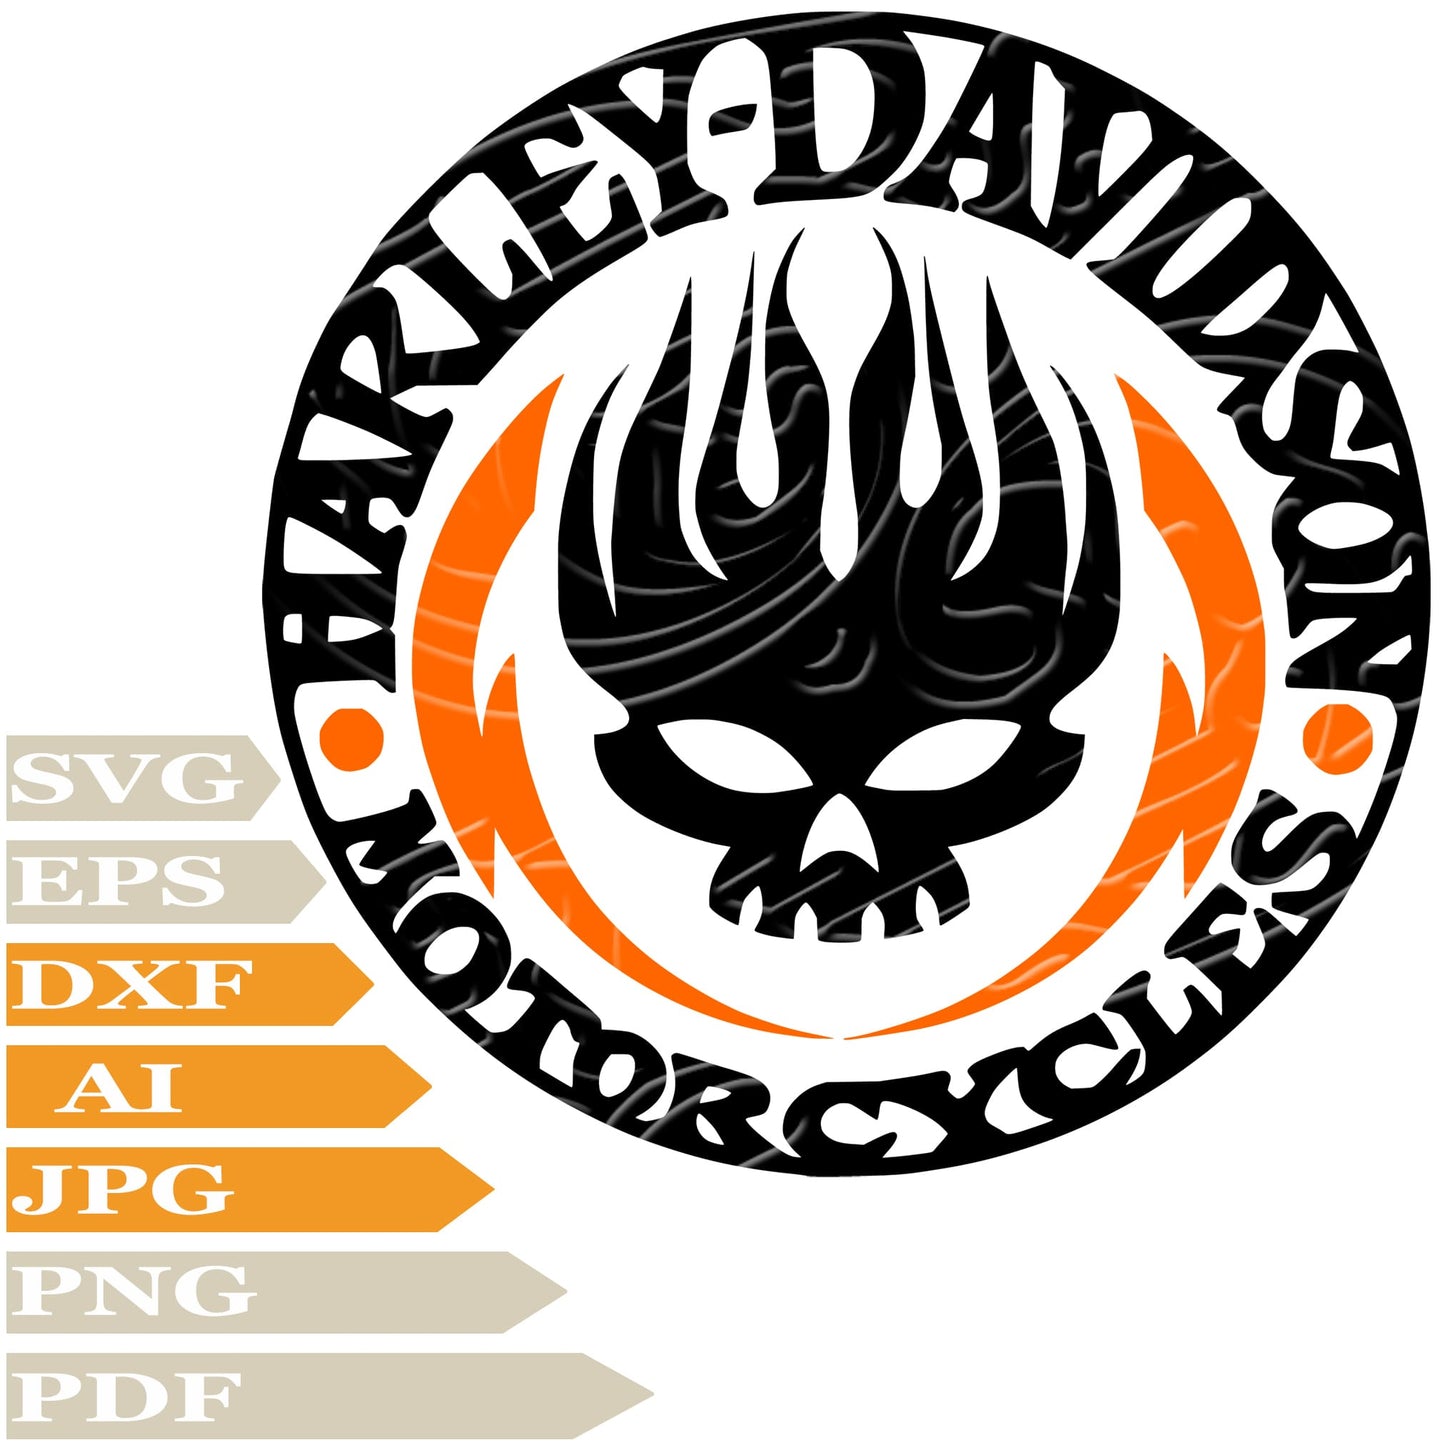 Show your loyalty to the Harley Davidson brand with this vector graphics design. A perfect addition to any tattoo or Cricut project, this SVG file contains the iconic skull and logo of the Harley Davidson brand. Get the highest quality PNG, SVG, and vector graphic design available.